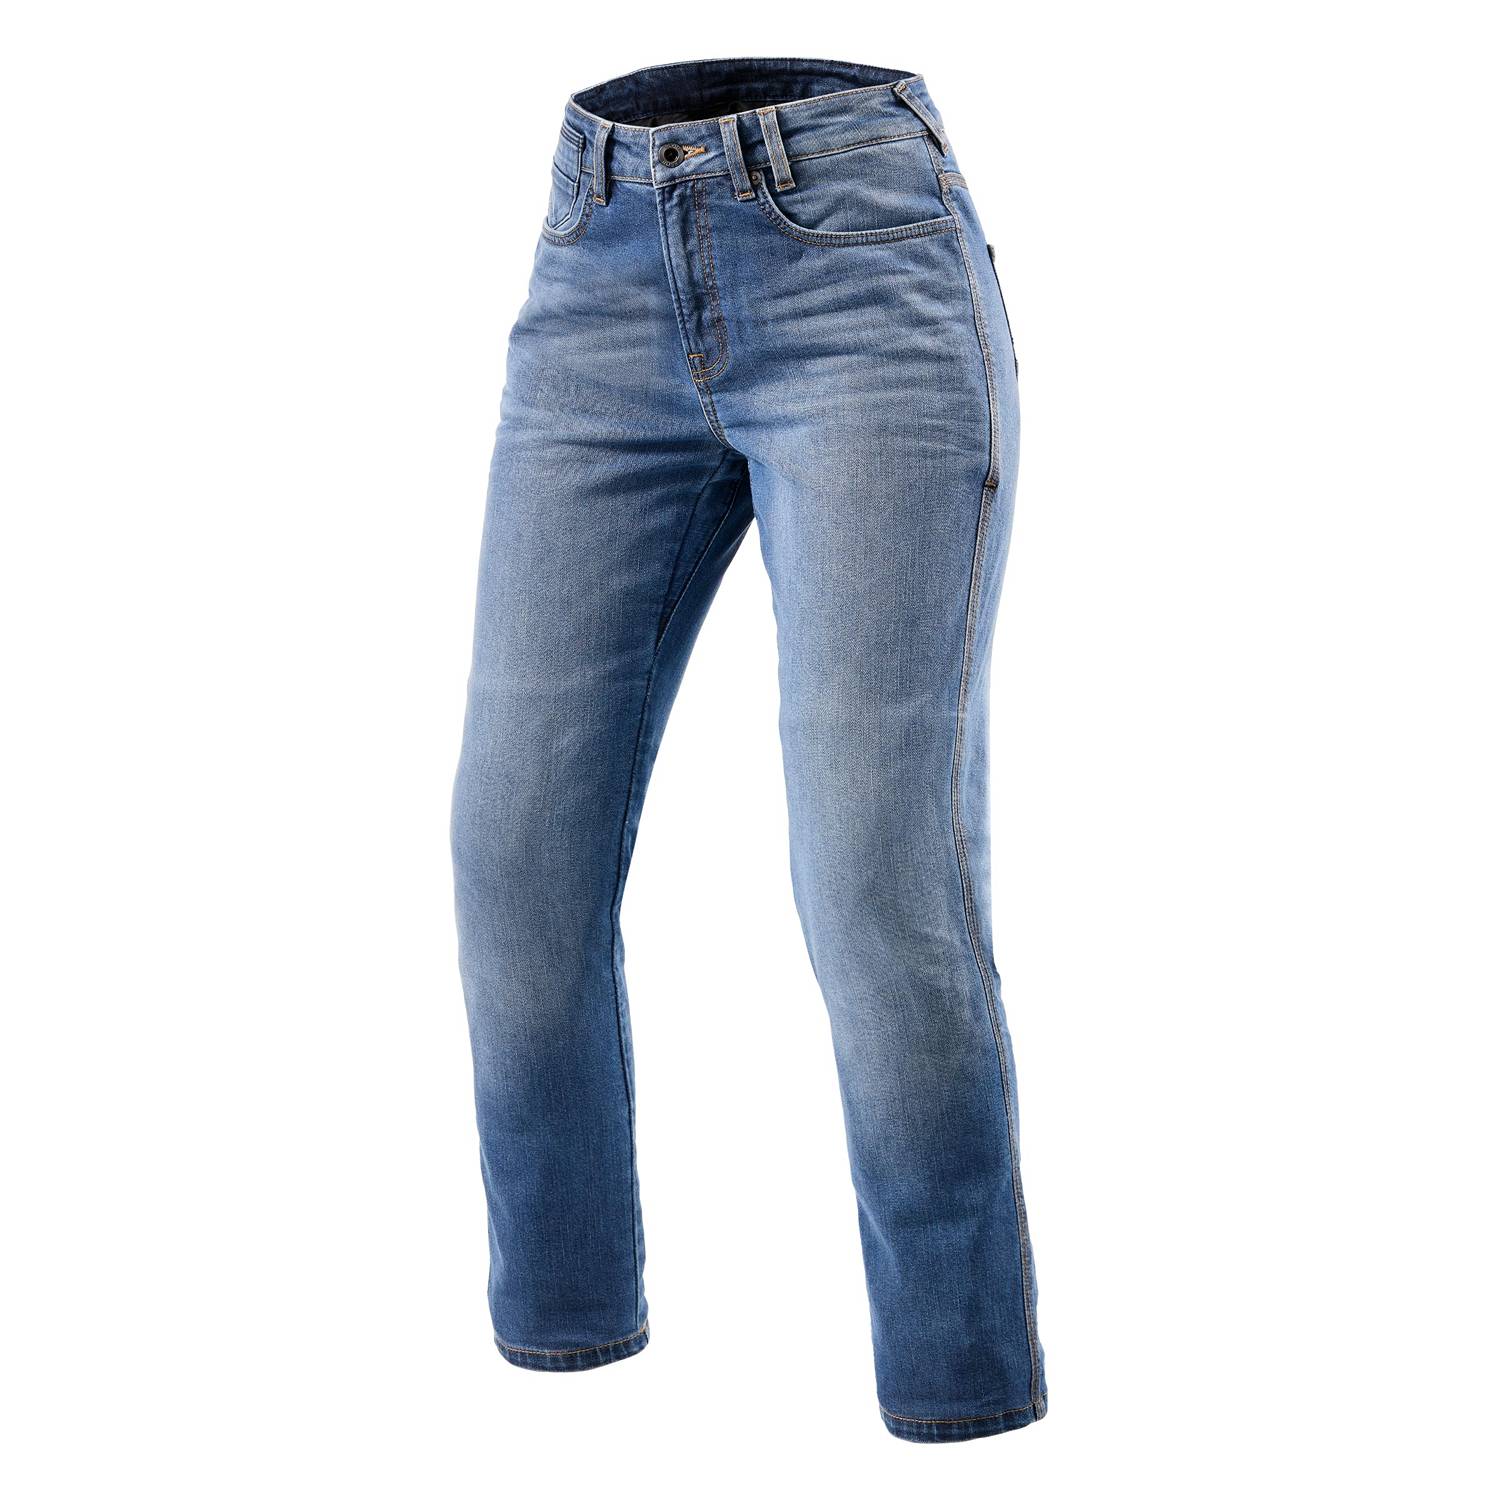 Image of REV'IT! Jeans Victoria 2 Ladies SF Classic Blue Used Motorcycle Jeans Größe L32/W32